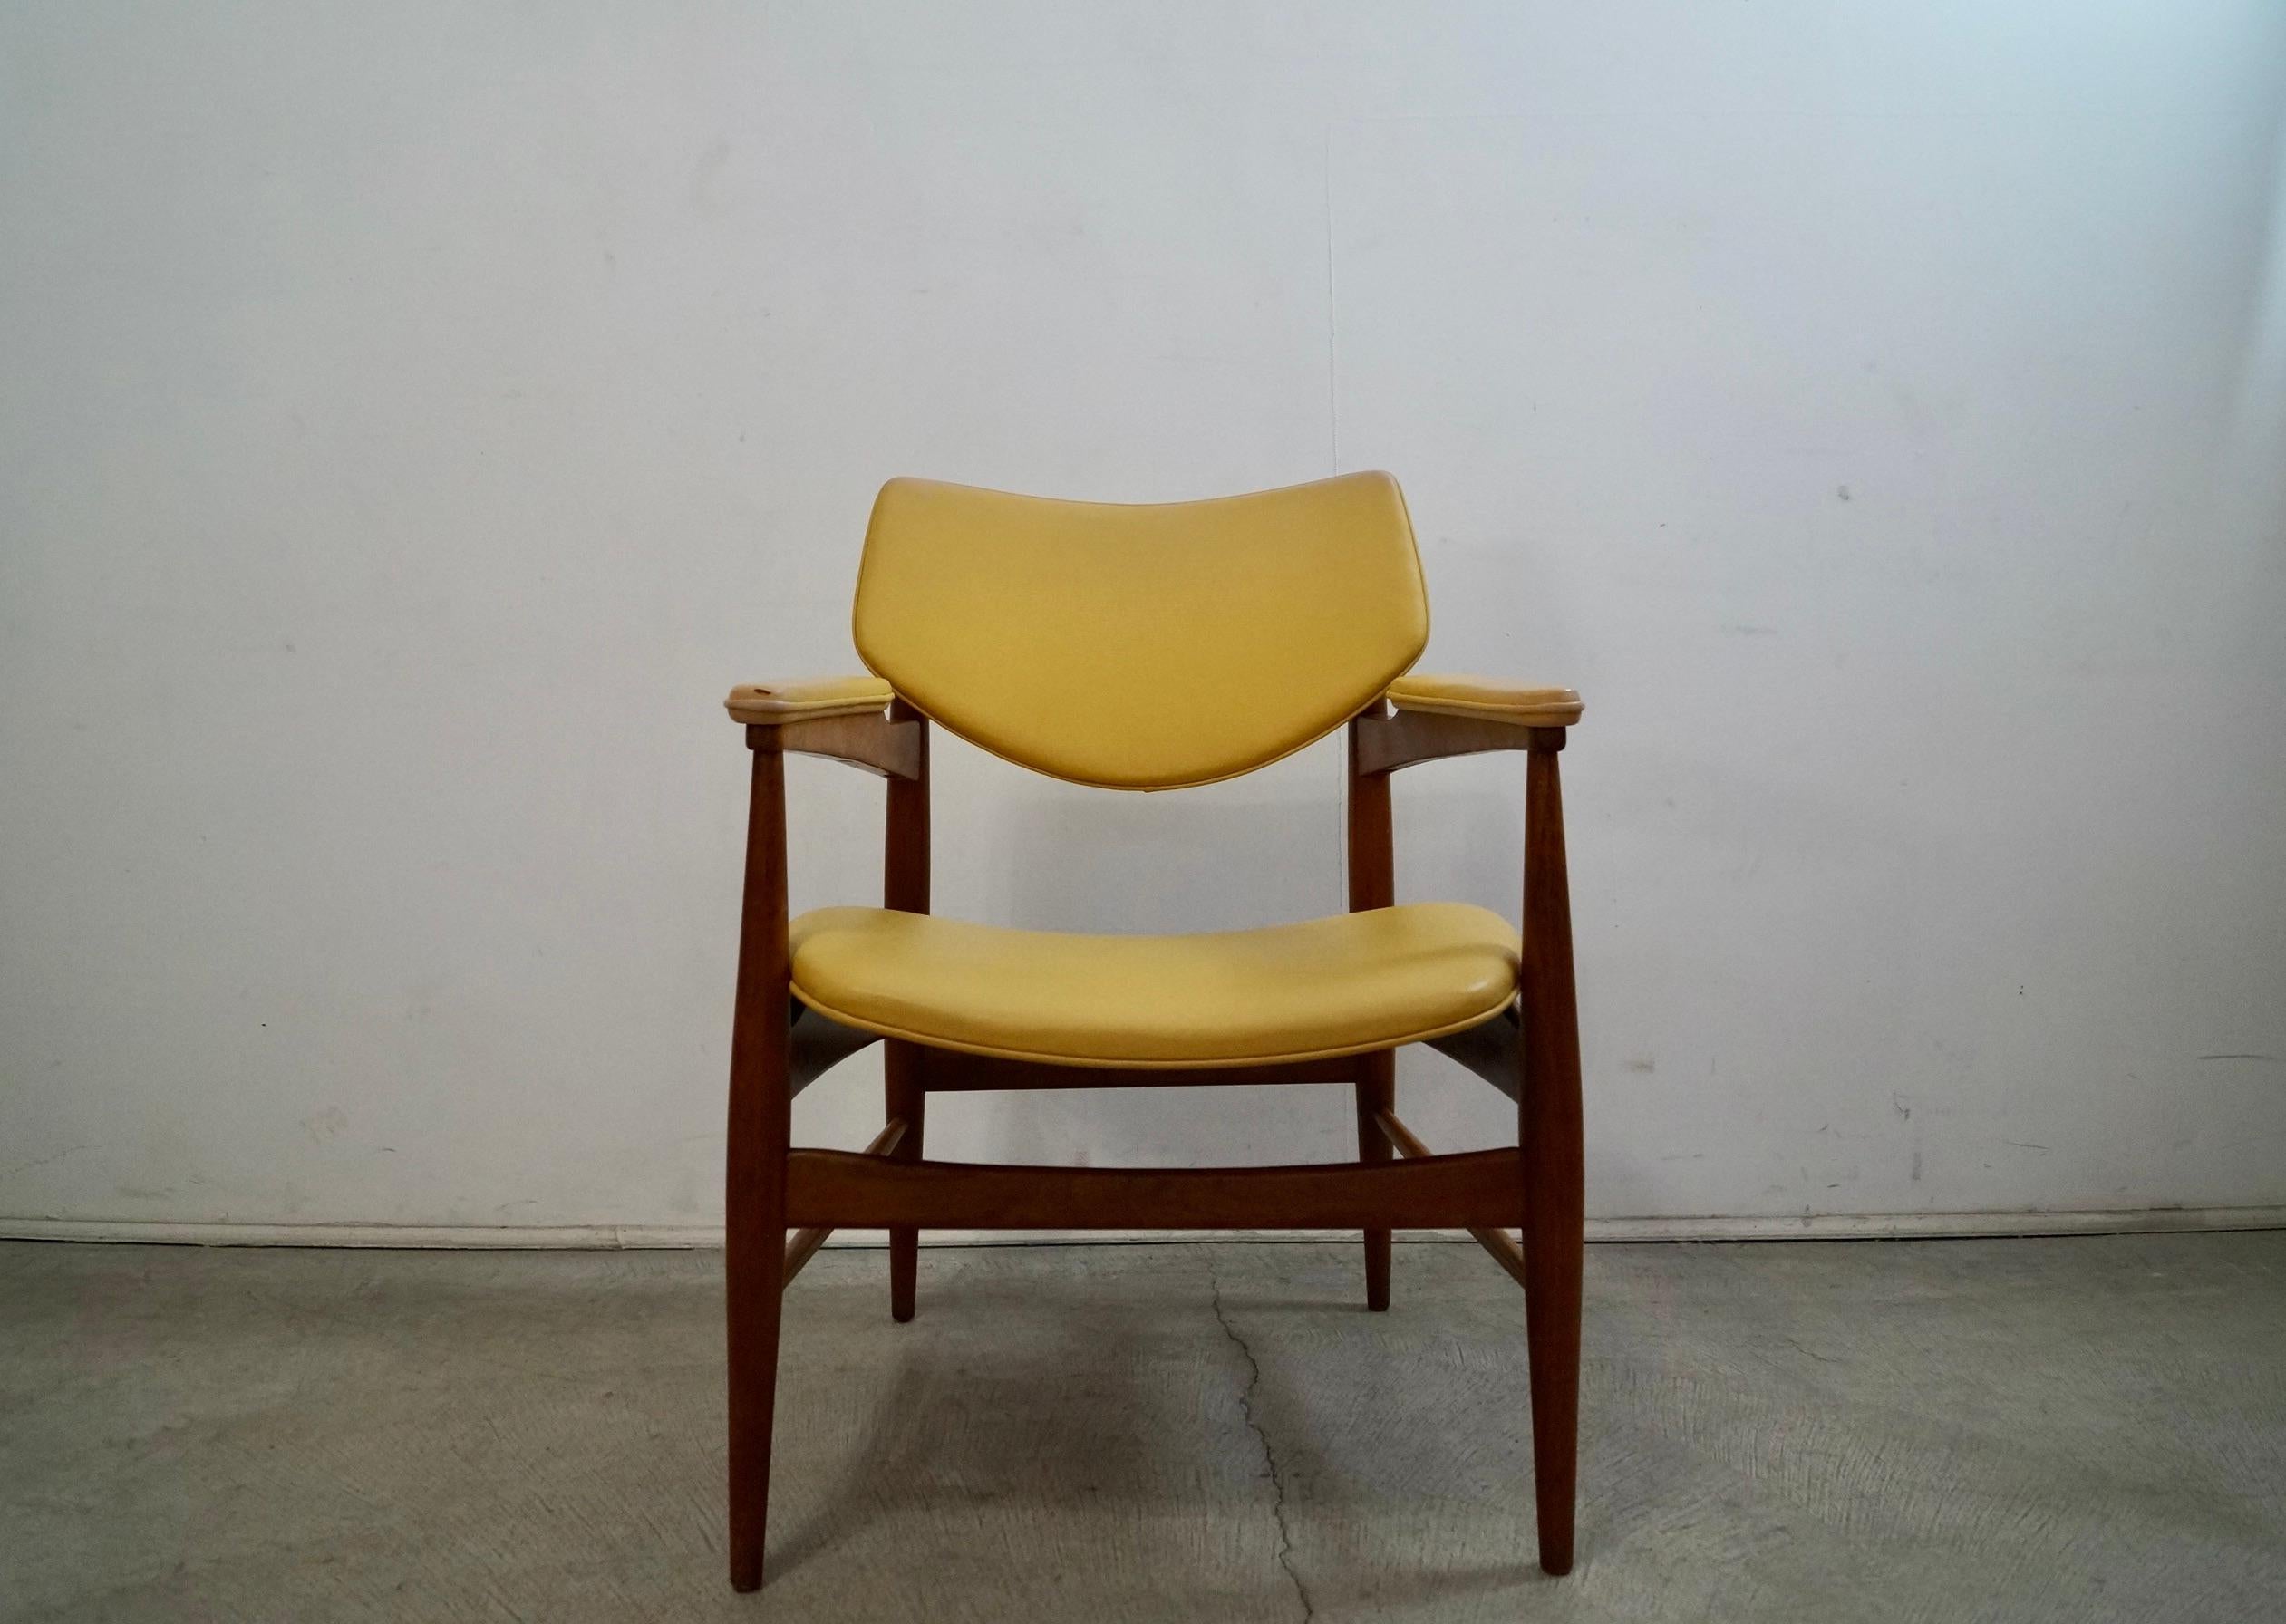 Vintage original Midcentury Modern armchair for sale. Manufactured in the 1950's by Thonet, and still has the original tag nicely intact. It has the original naugahyde vinyl upholstery in yellow and shows some vintage wear. The solid walnut frame